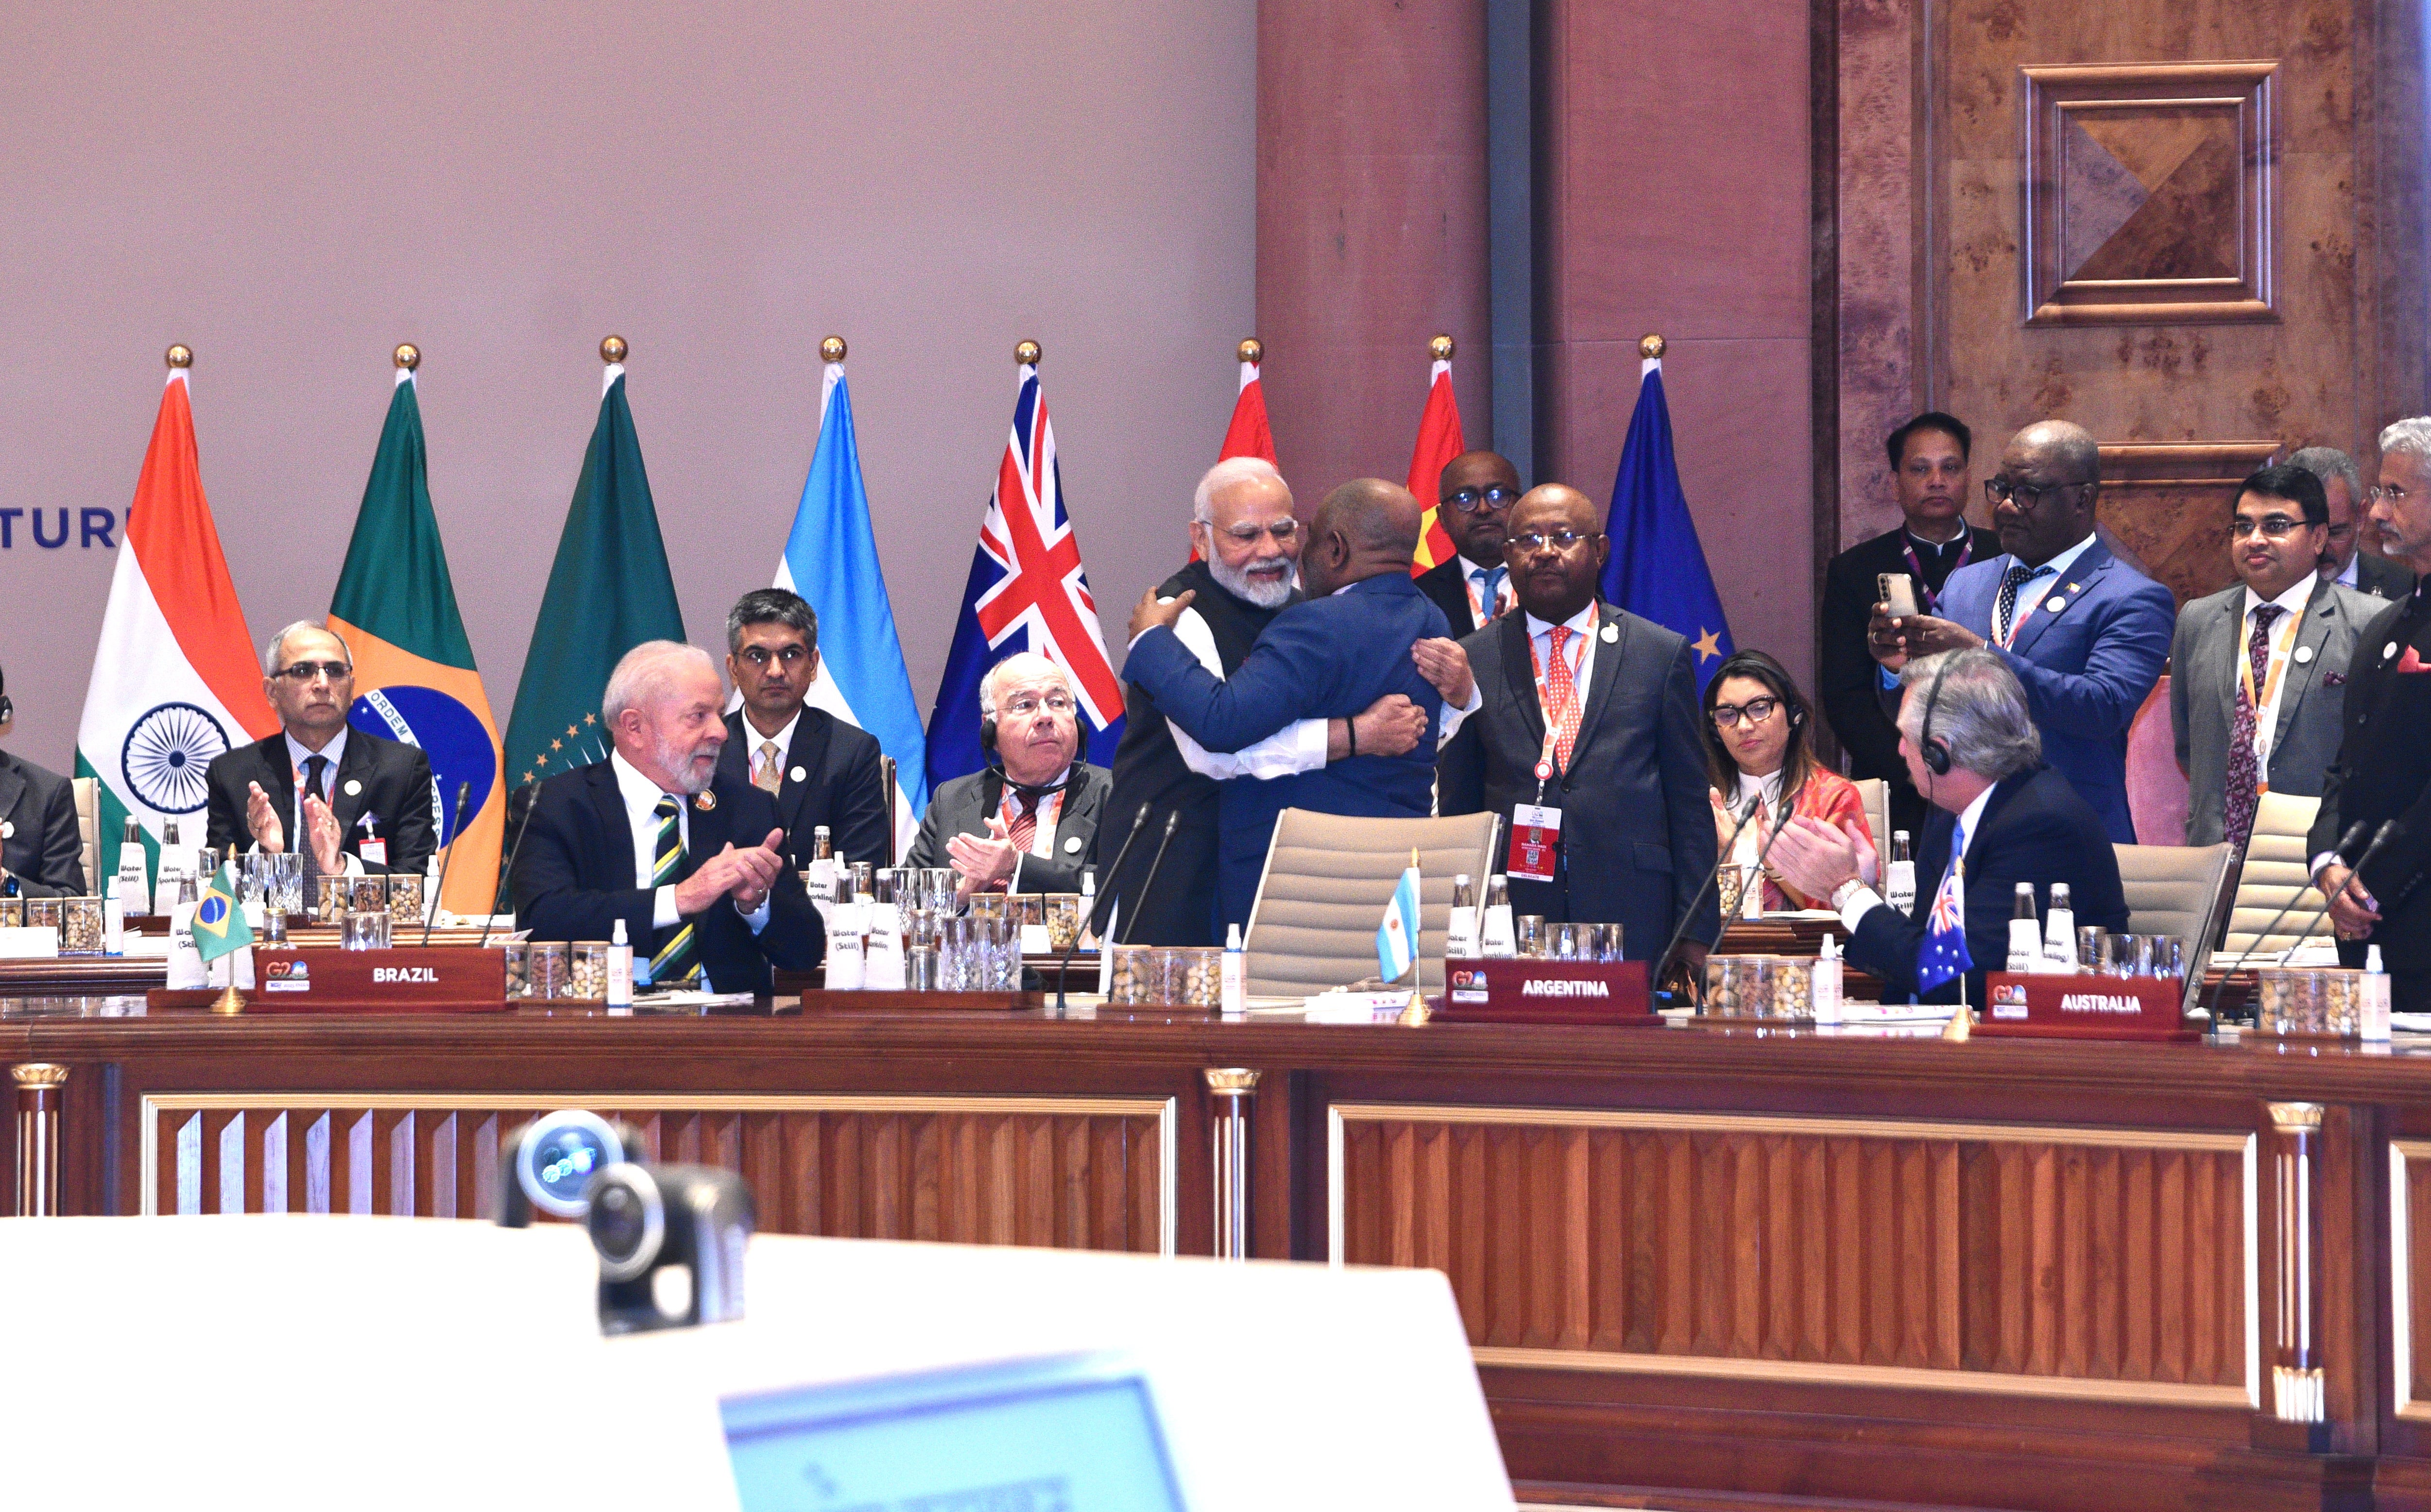 Modi embracing Comoros president and African Union chair Azali Assoumani (C-R) after welcoming him to take up a permanent chair at the G20 table